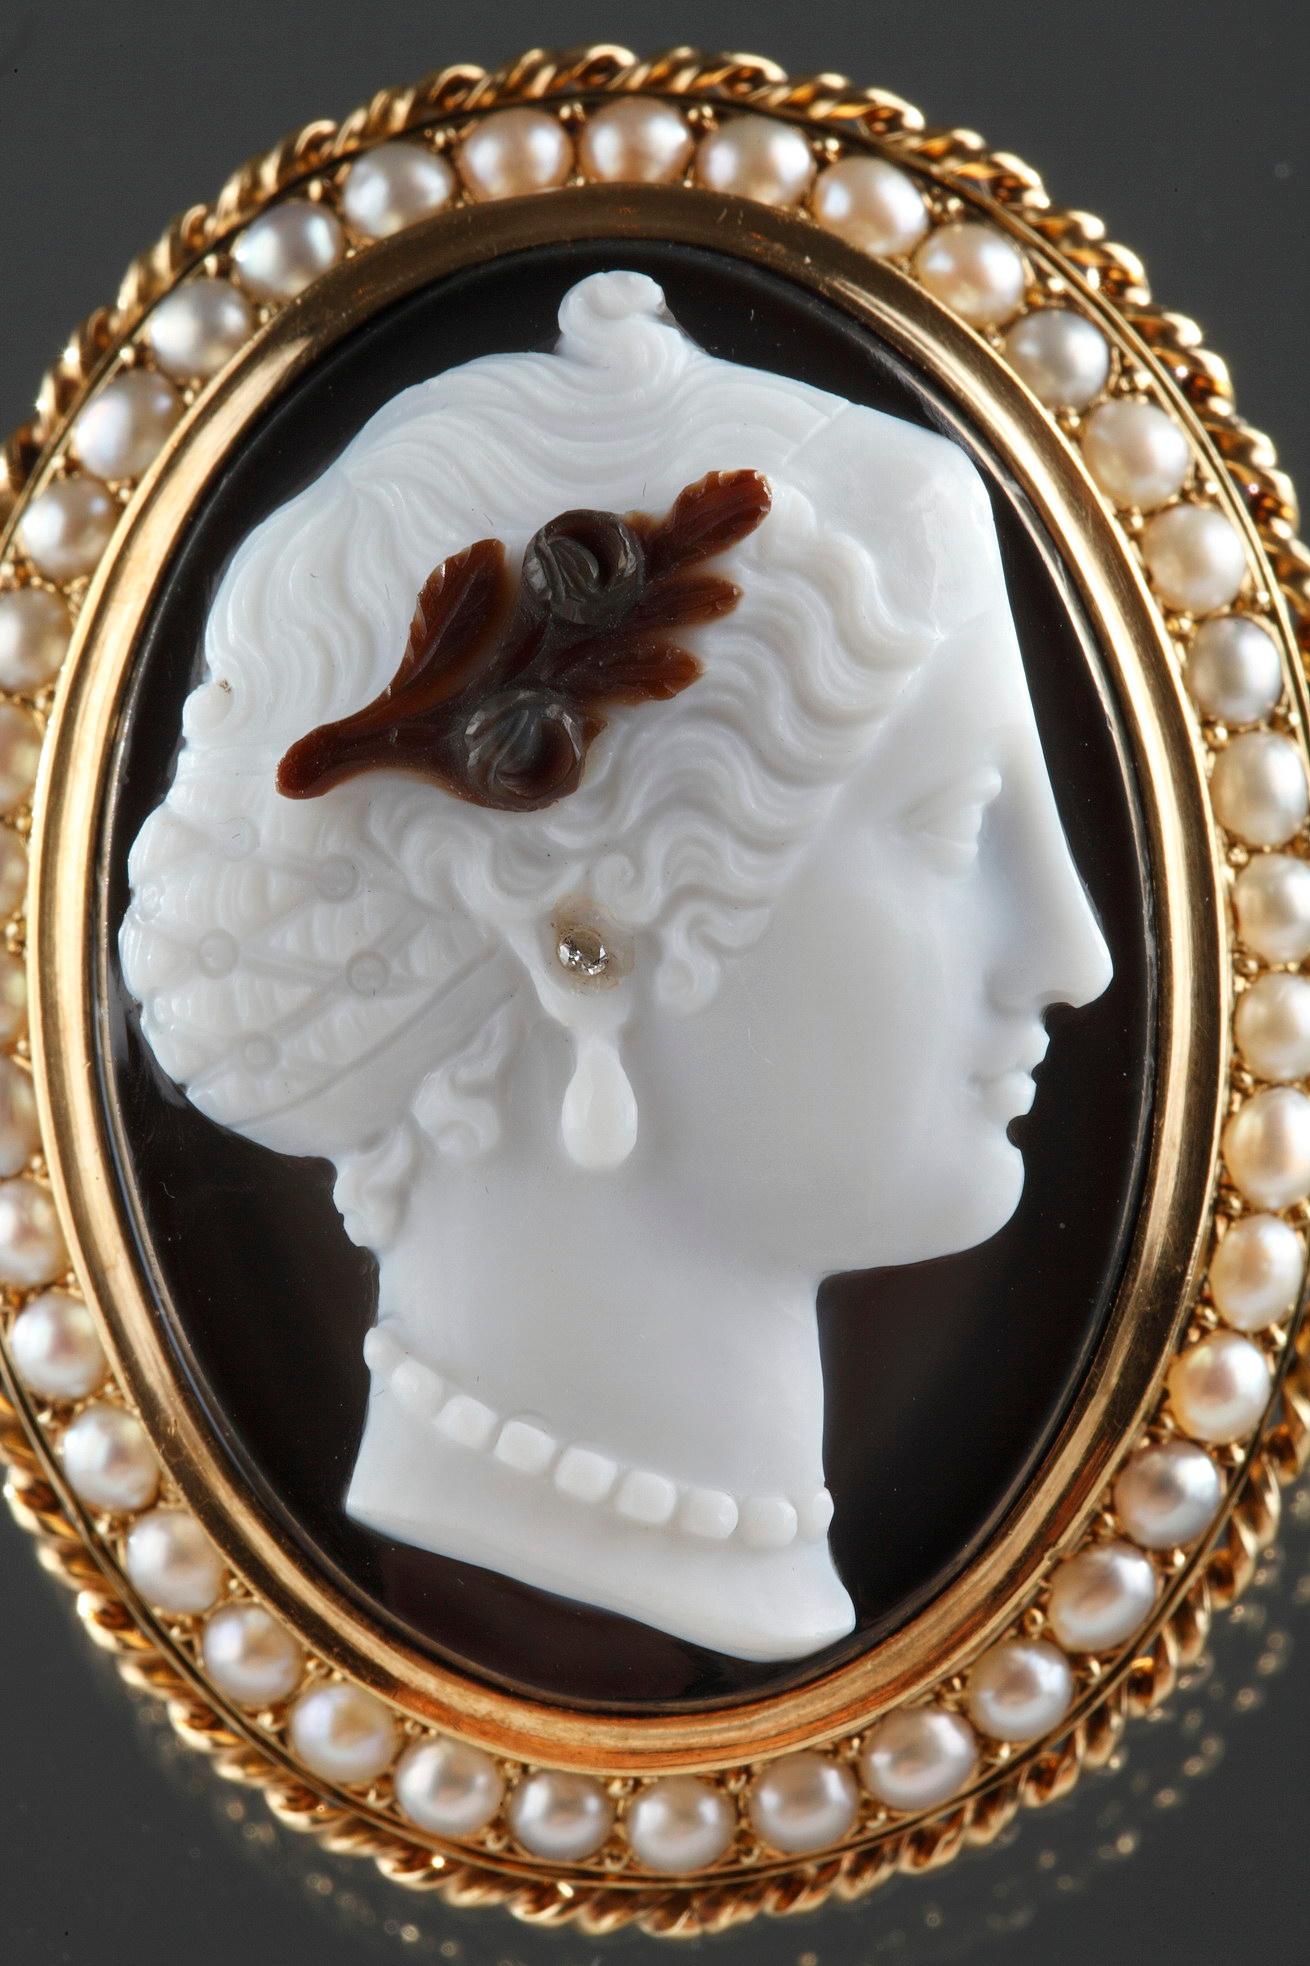 19th century oval agate brooch. It depicts the profile of a woman wearing a necklace and diamond earrings, set within a golden frame and accented with a ring of pearls. The sculpting of this brooch is very finely done. 

French mark “tête d’aigle”